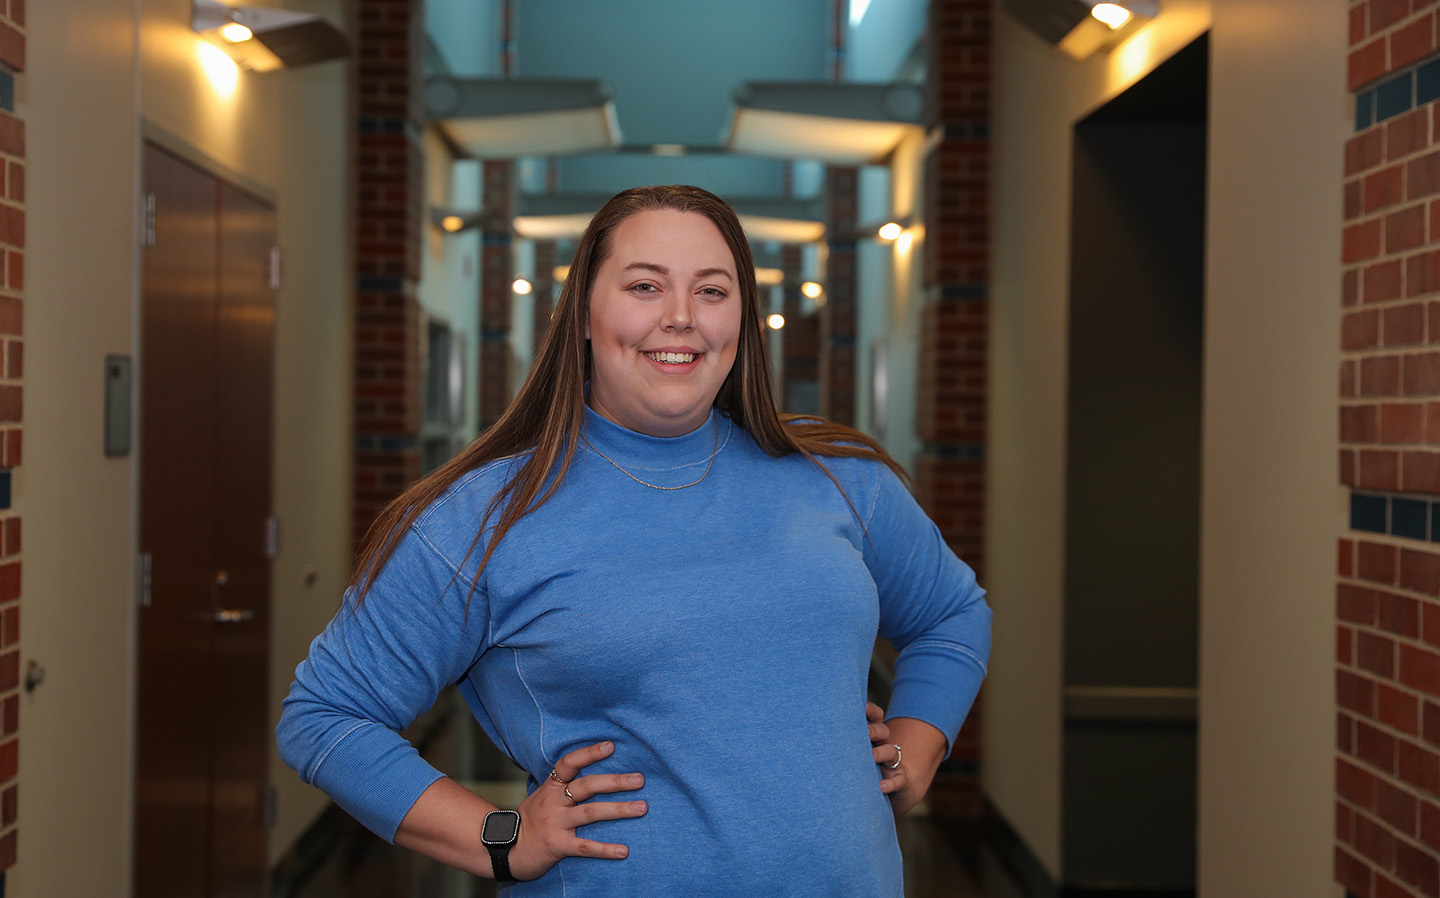 Layce Mayhew graduates from UNK on Friday with a bachelor’s degree in family science and a minor in behavioral and mental health. She’ll start the master’s program in clinical mental health counseling next month. (Photo by Erika Pritchard, UNK Communications)